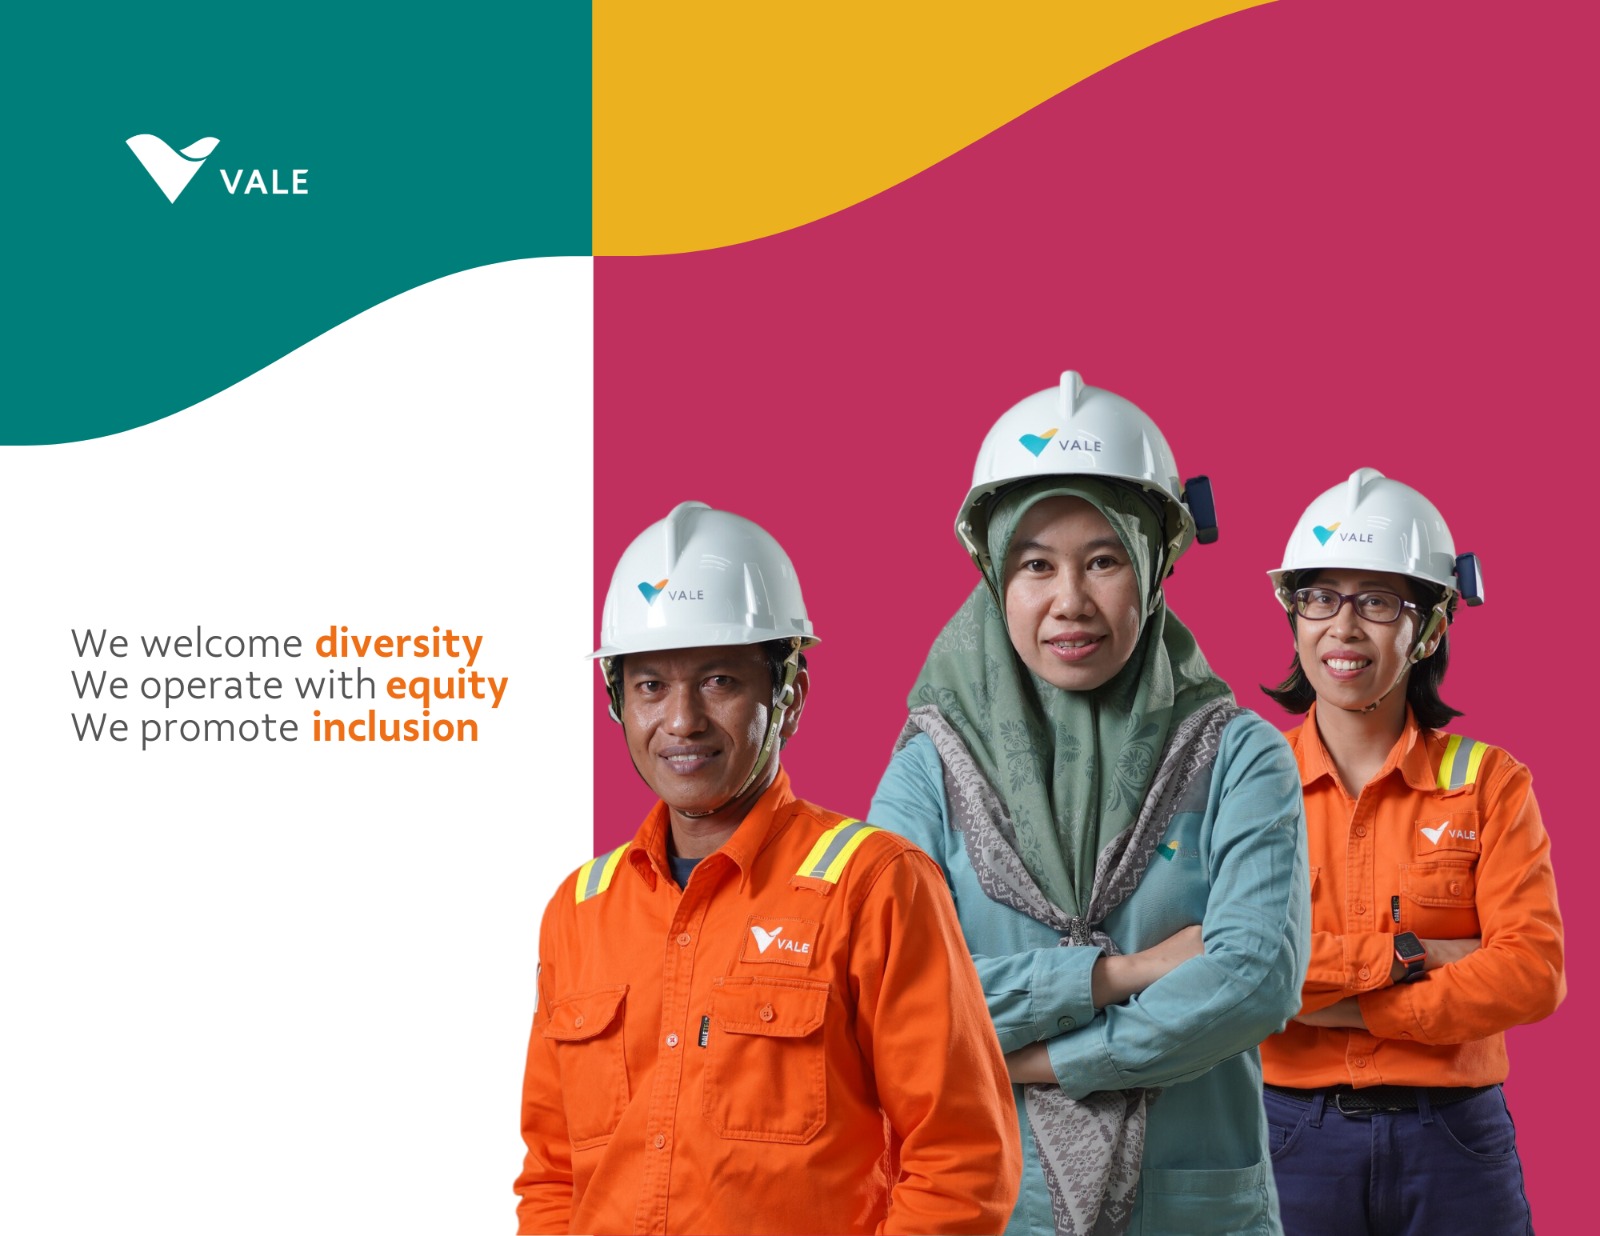 Three Vale employees, one man and two women. They are wearing hard hats and uniforms. One of the women has a scarf wrapped around her head. Next to then theres is the sentence: "we welcome diversity, we operate with equity, we promote inclusion"